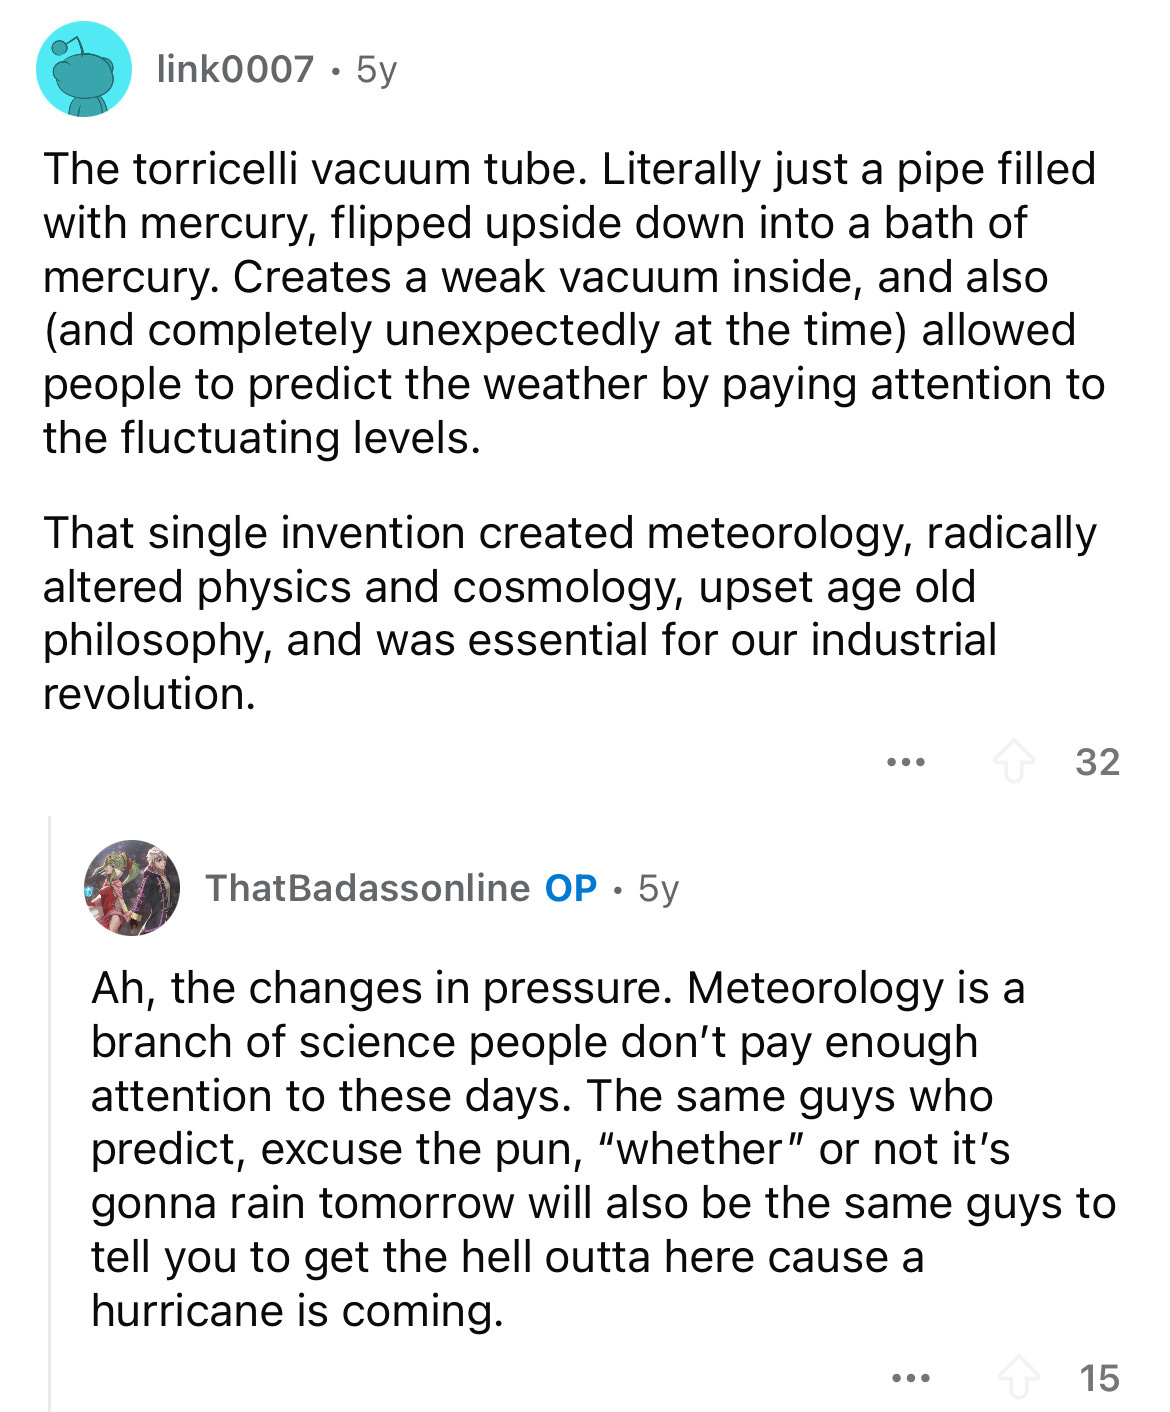 circle - link0007.5y The torricelli vacuum tube. Literally just a pipe filled with mercury, flipped upside down into a bath of mercury. Creates a weak vacuum inside, and also and completely unexpectedly at the time allowed people to predict the weather by